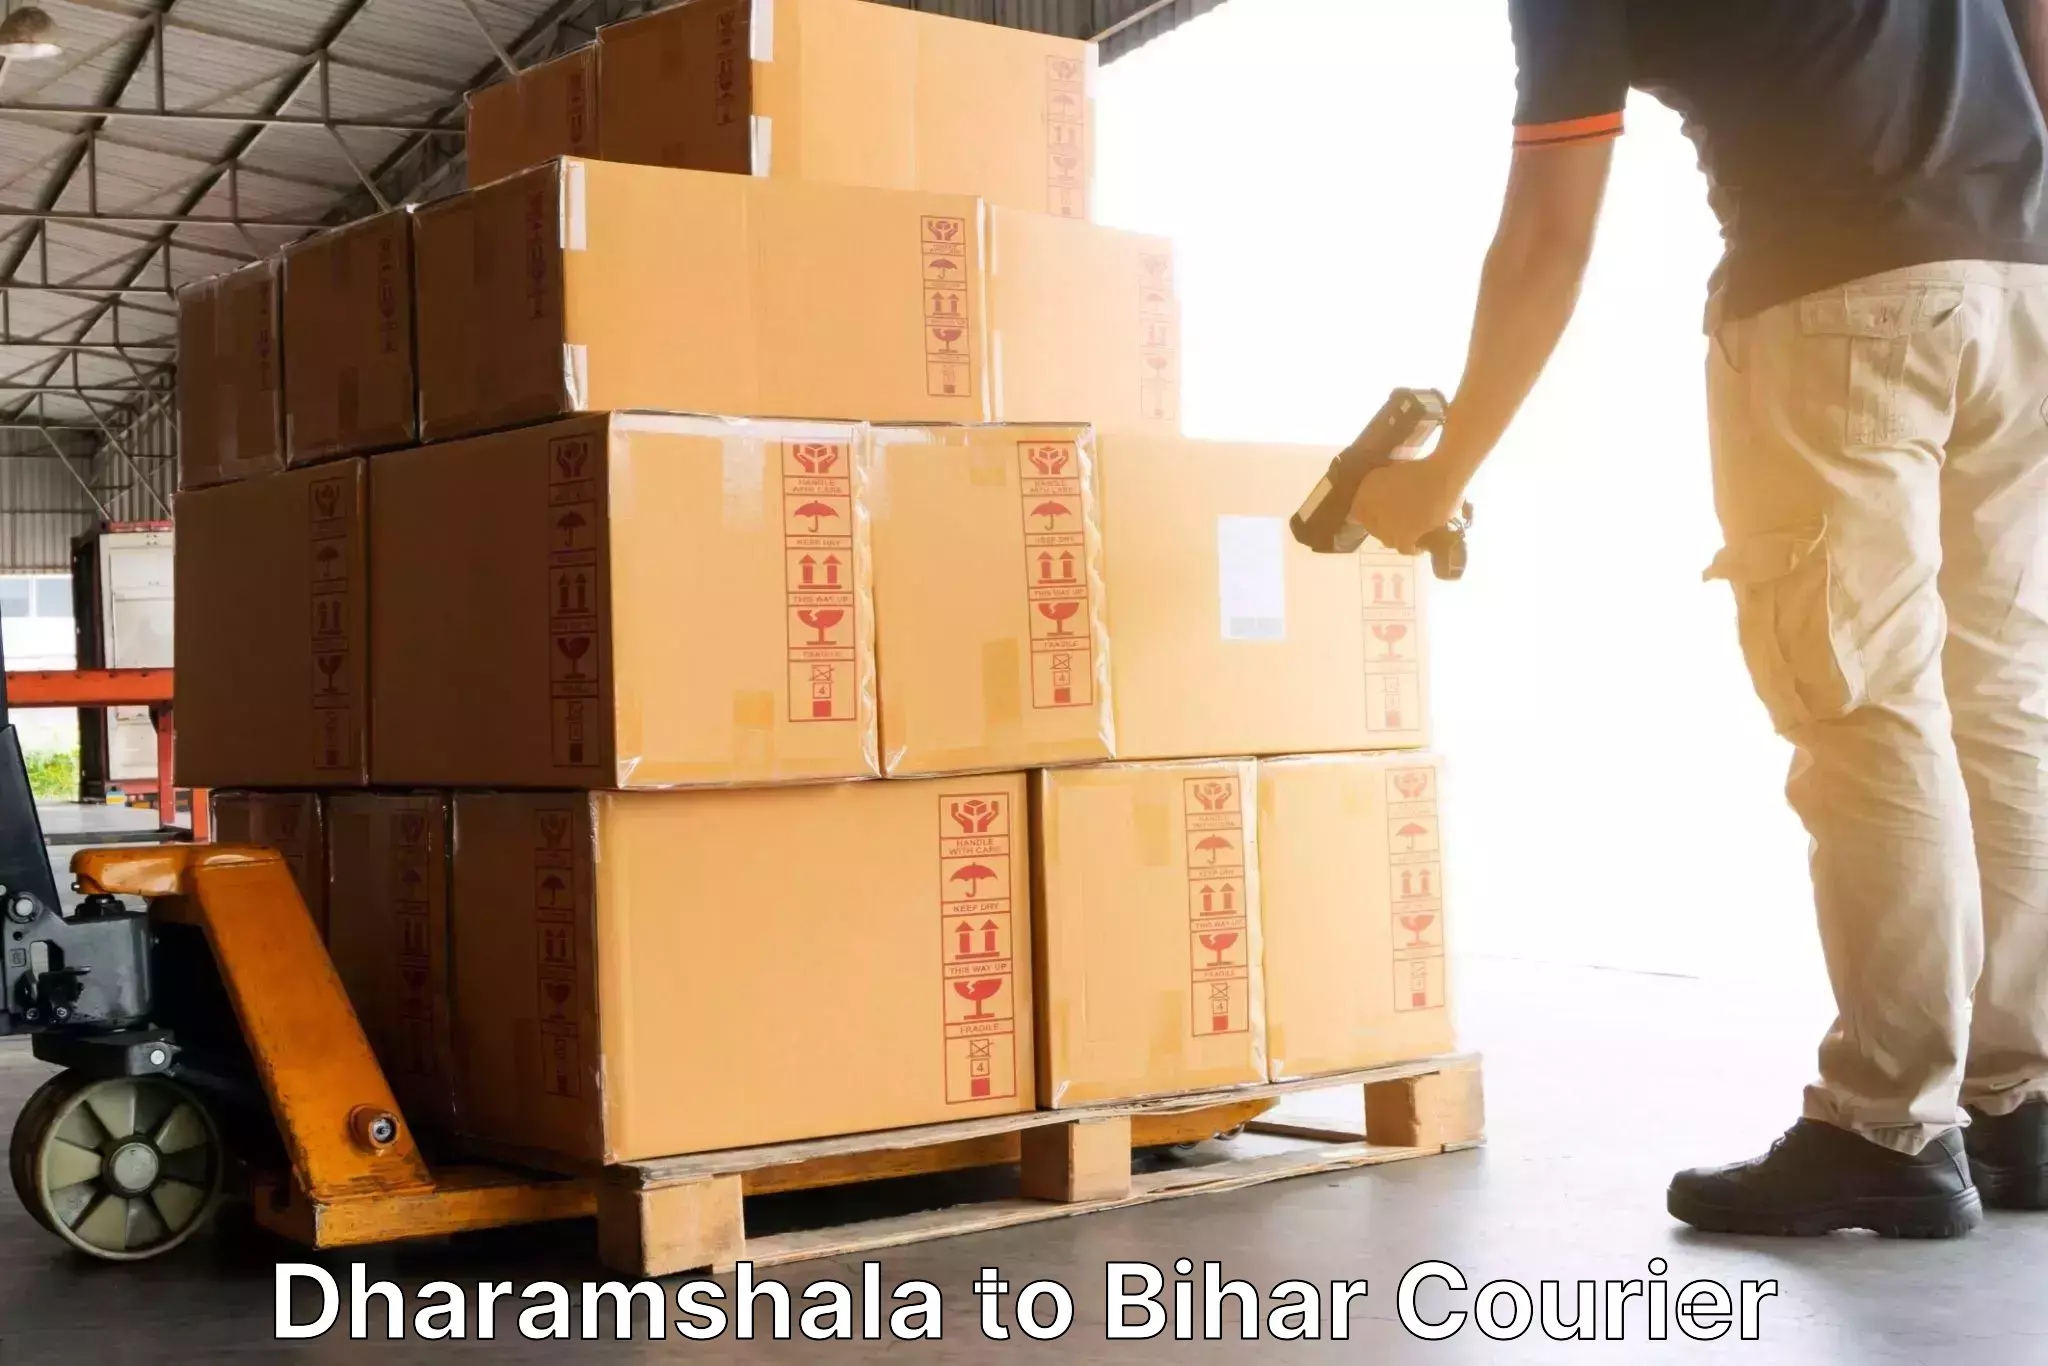 Courier service innovation Dharamshala to Punsia